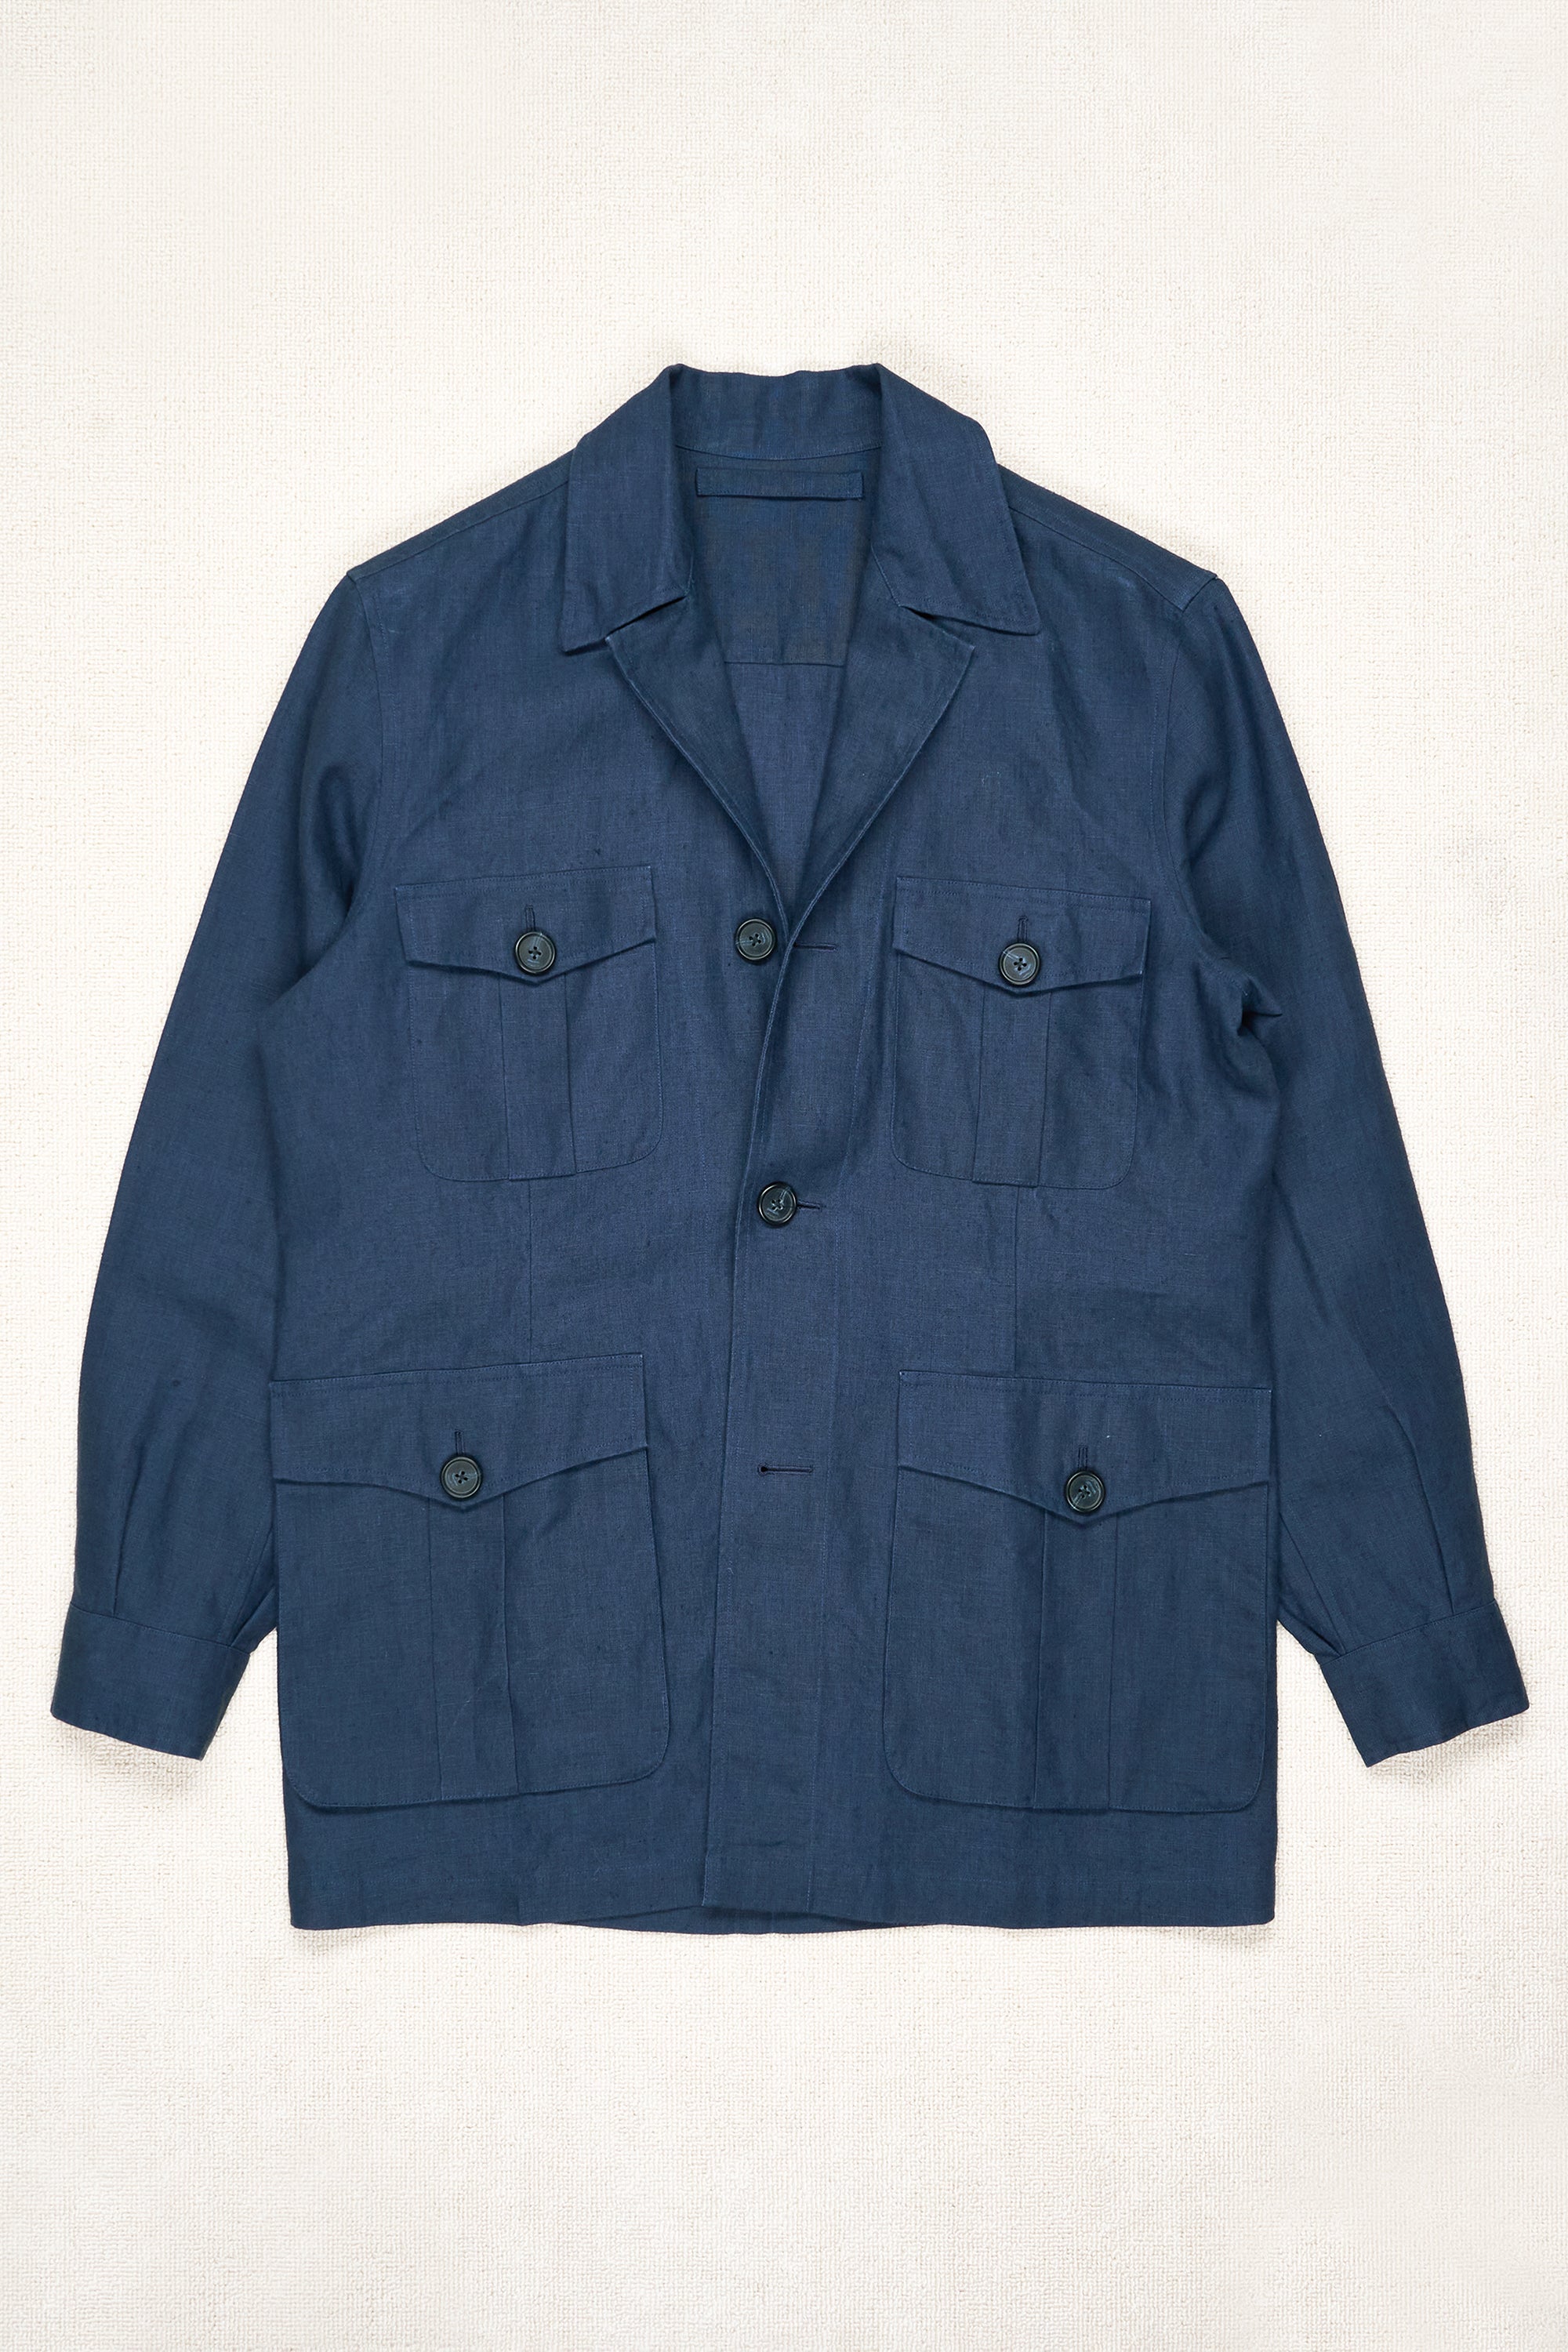 The Armoury by Ascot Chang Navy Linen Safari II Jacket MTO